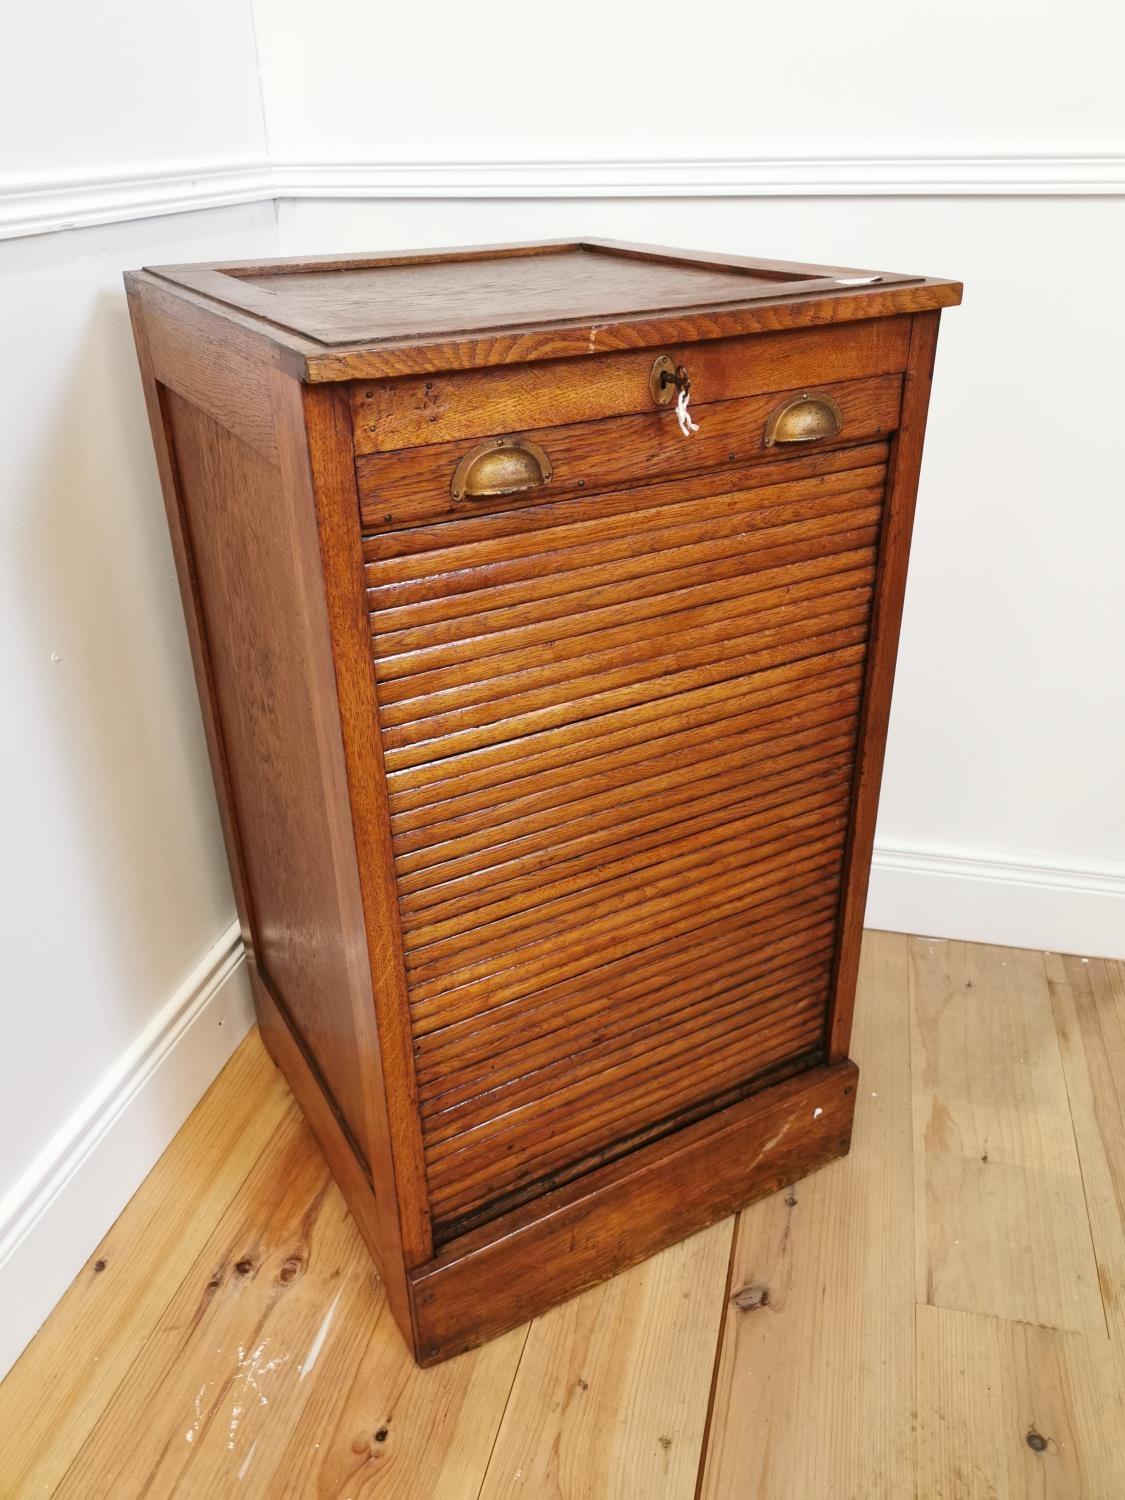 Early 20th. C. oak office cabinet with tambour door